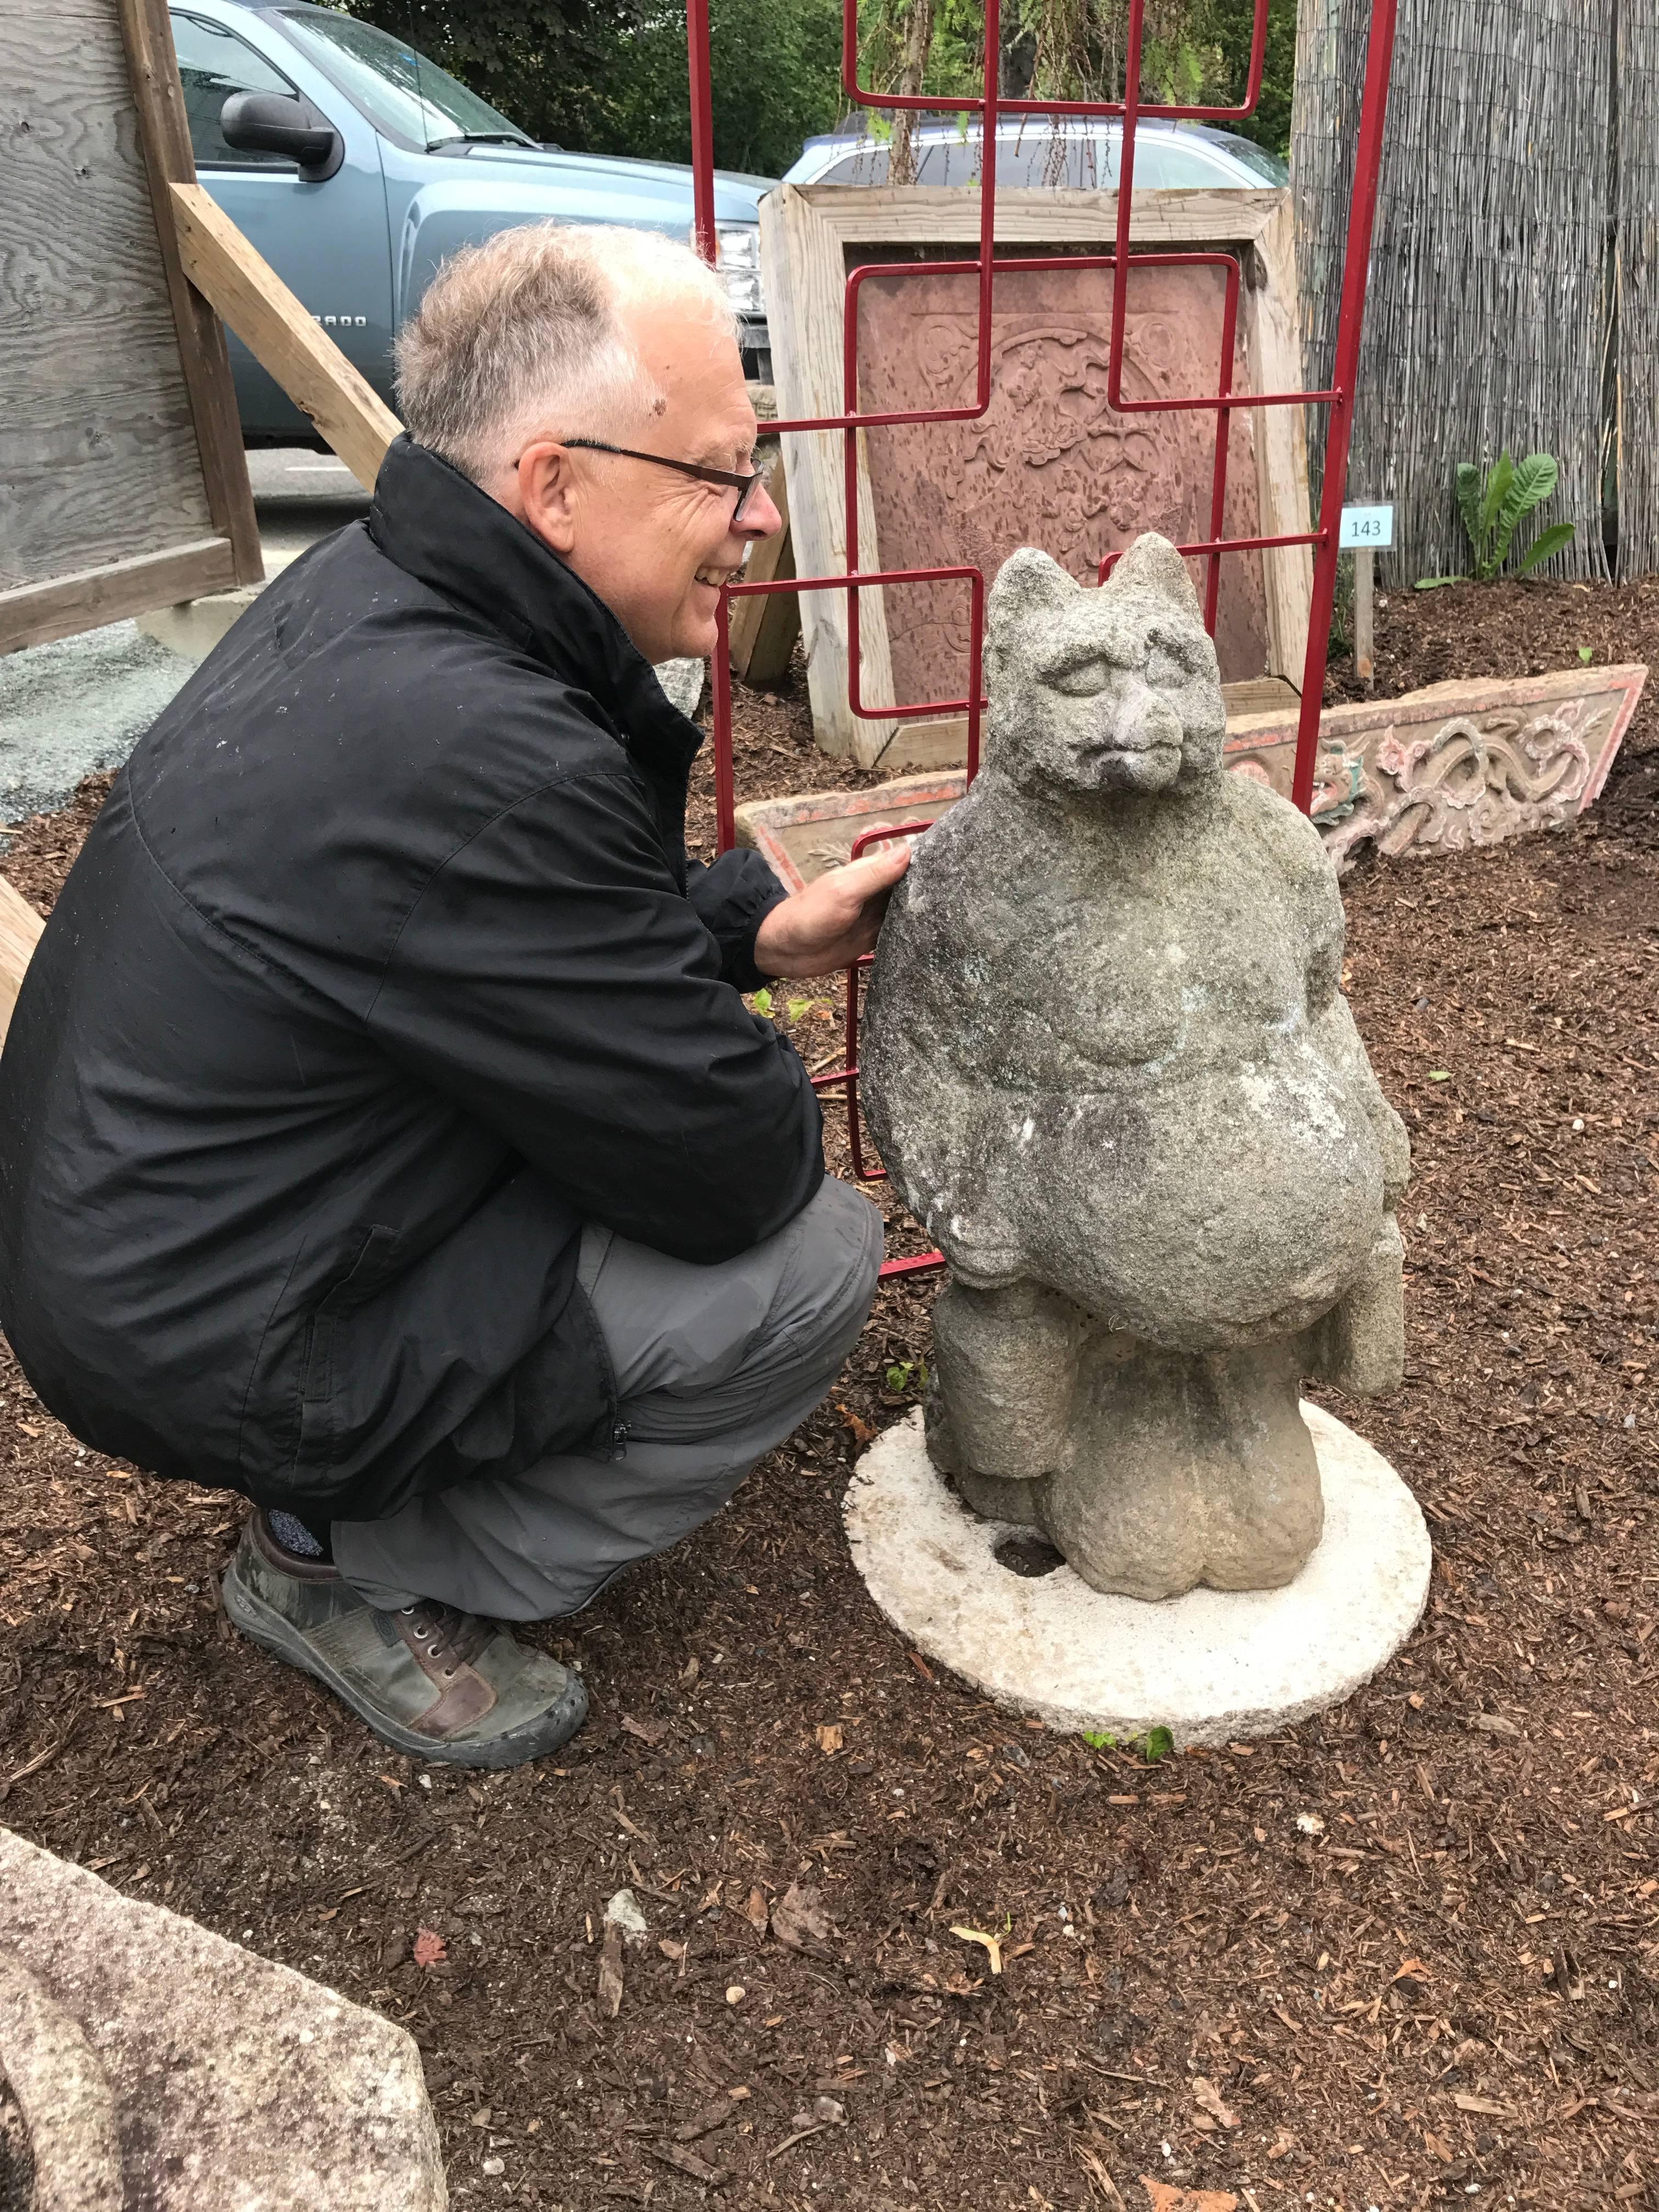 Japan, this rare museum quality one-of-a-kind big belly stone bear (actually a Folk Art hero raccoon dog, Tanuki) awaits placement in your favorite garden or indoor space!   He's a noted sake loving trickster and party animal with a mischievous